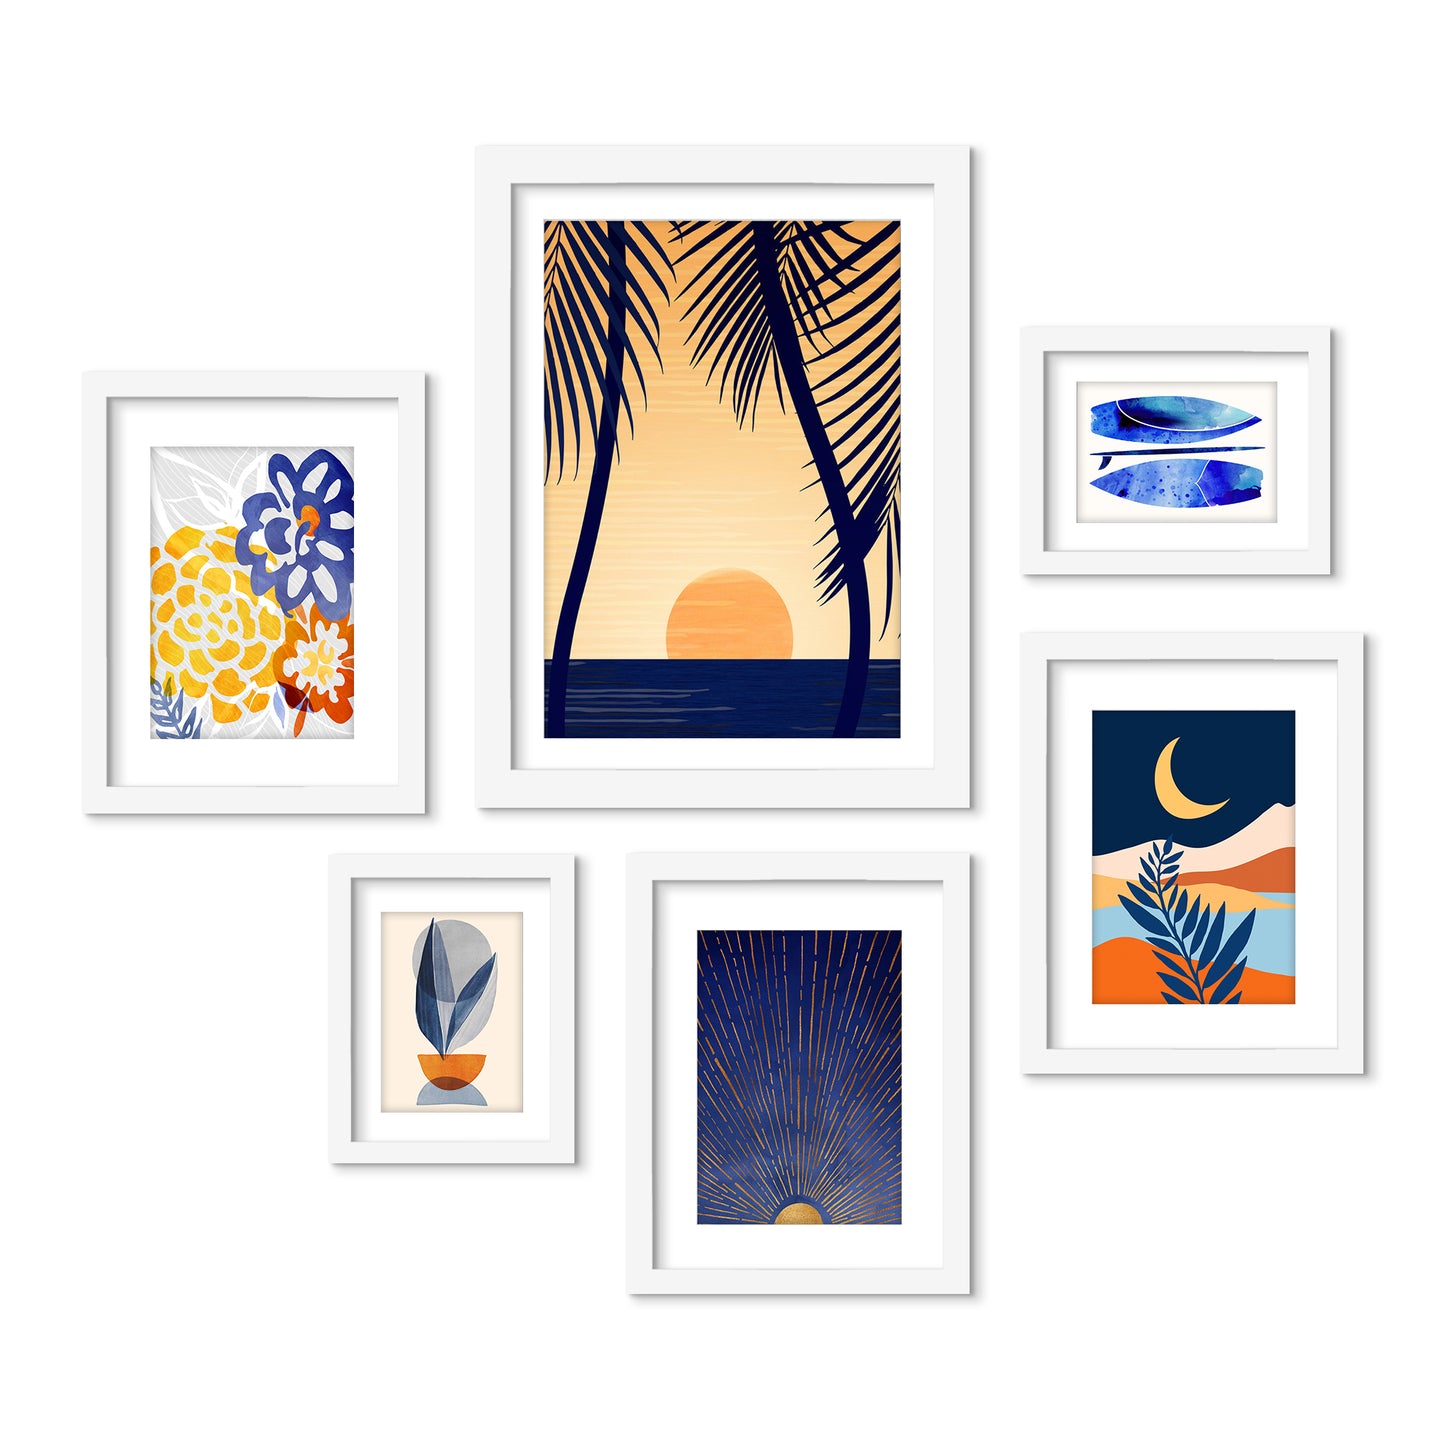 Golden Sunset With Palms - 6 Piece Framed Gallery Wall Set - Americanflat